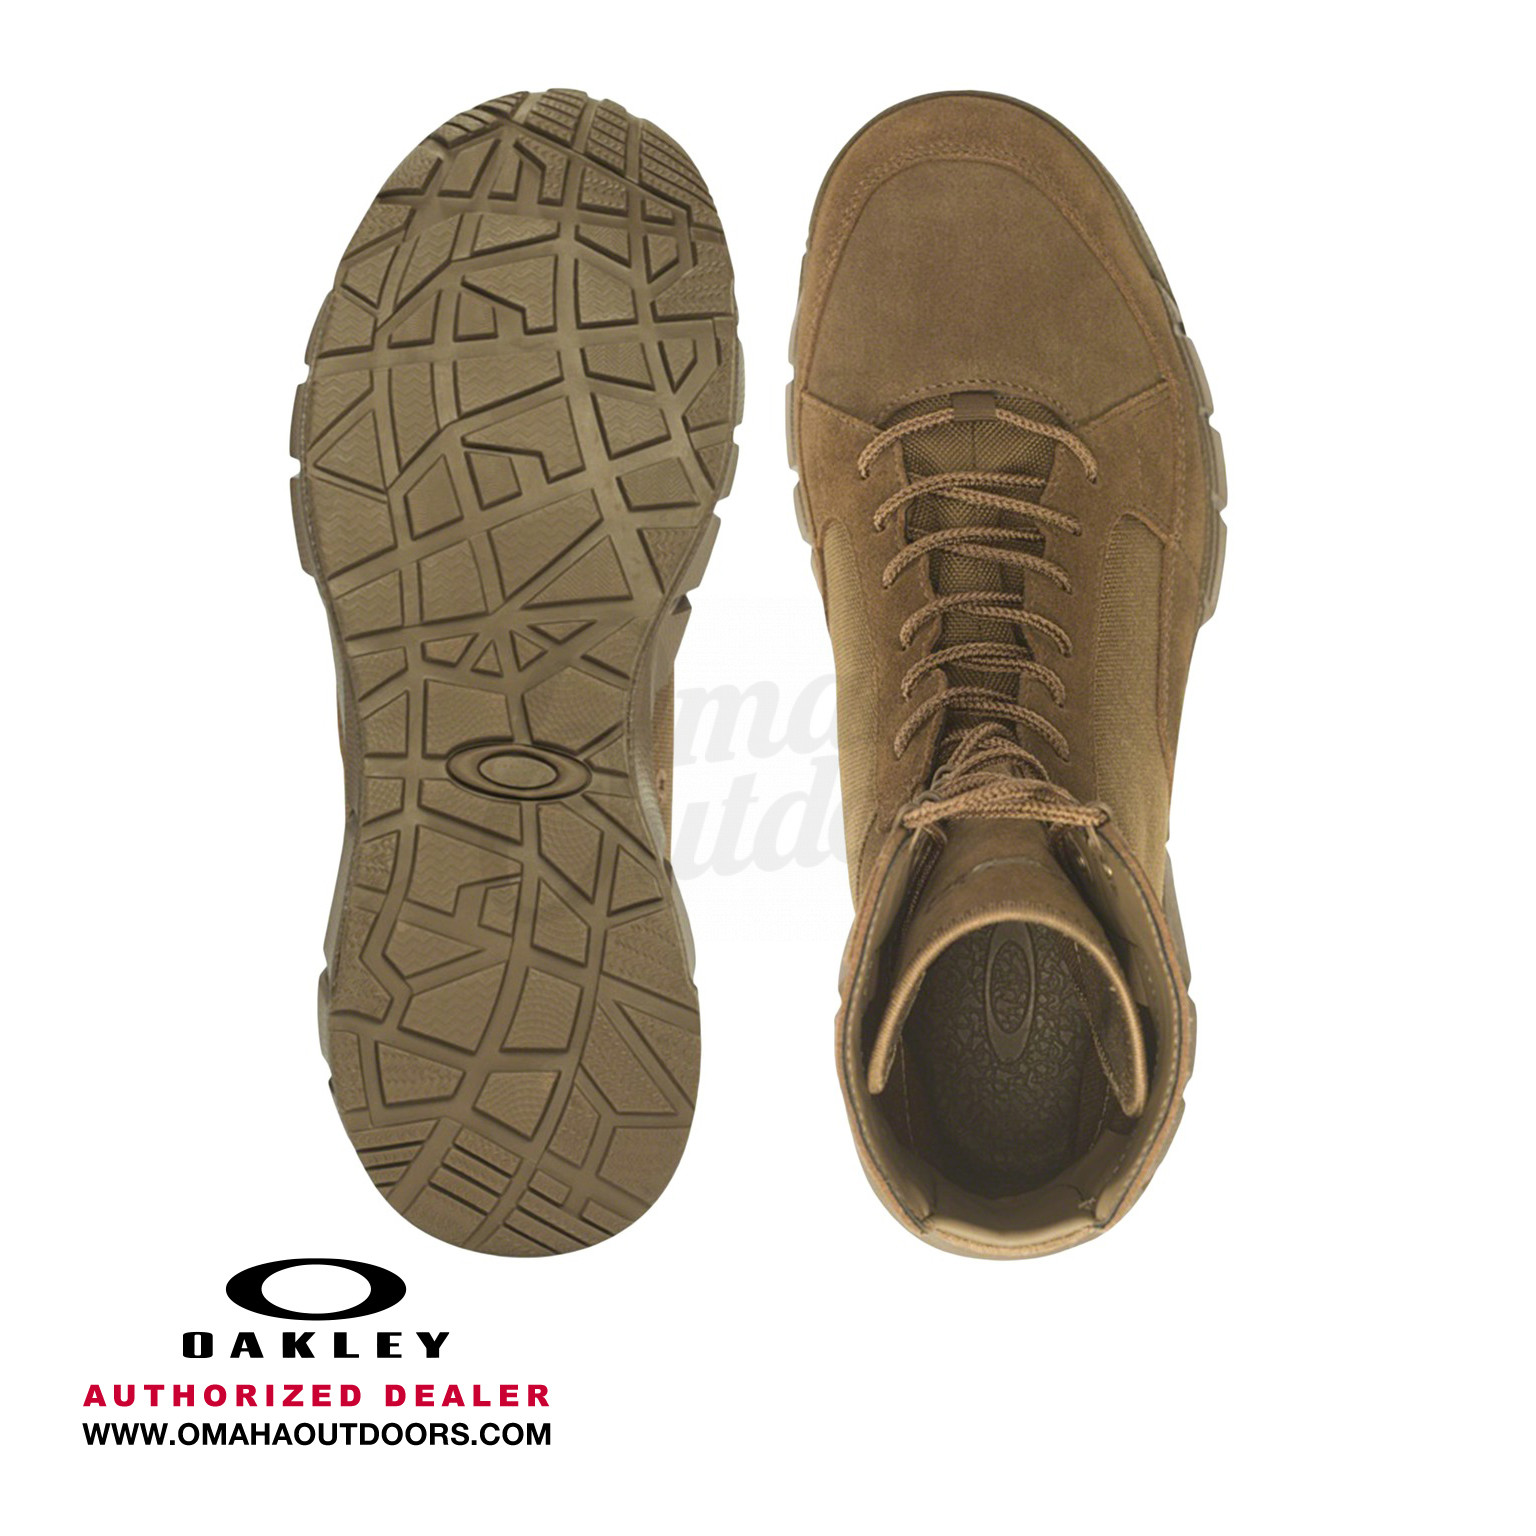 Oakley Light Assault Boot 2 Coyote Brown 9 - Free Shipping